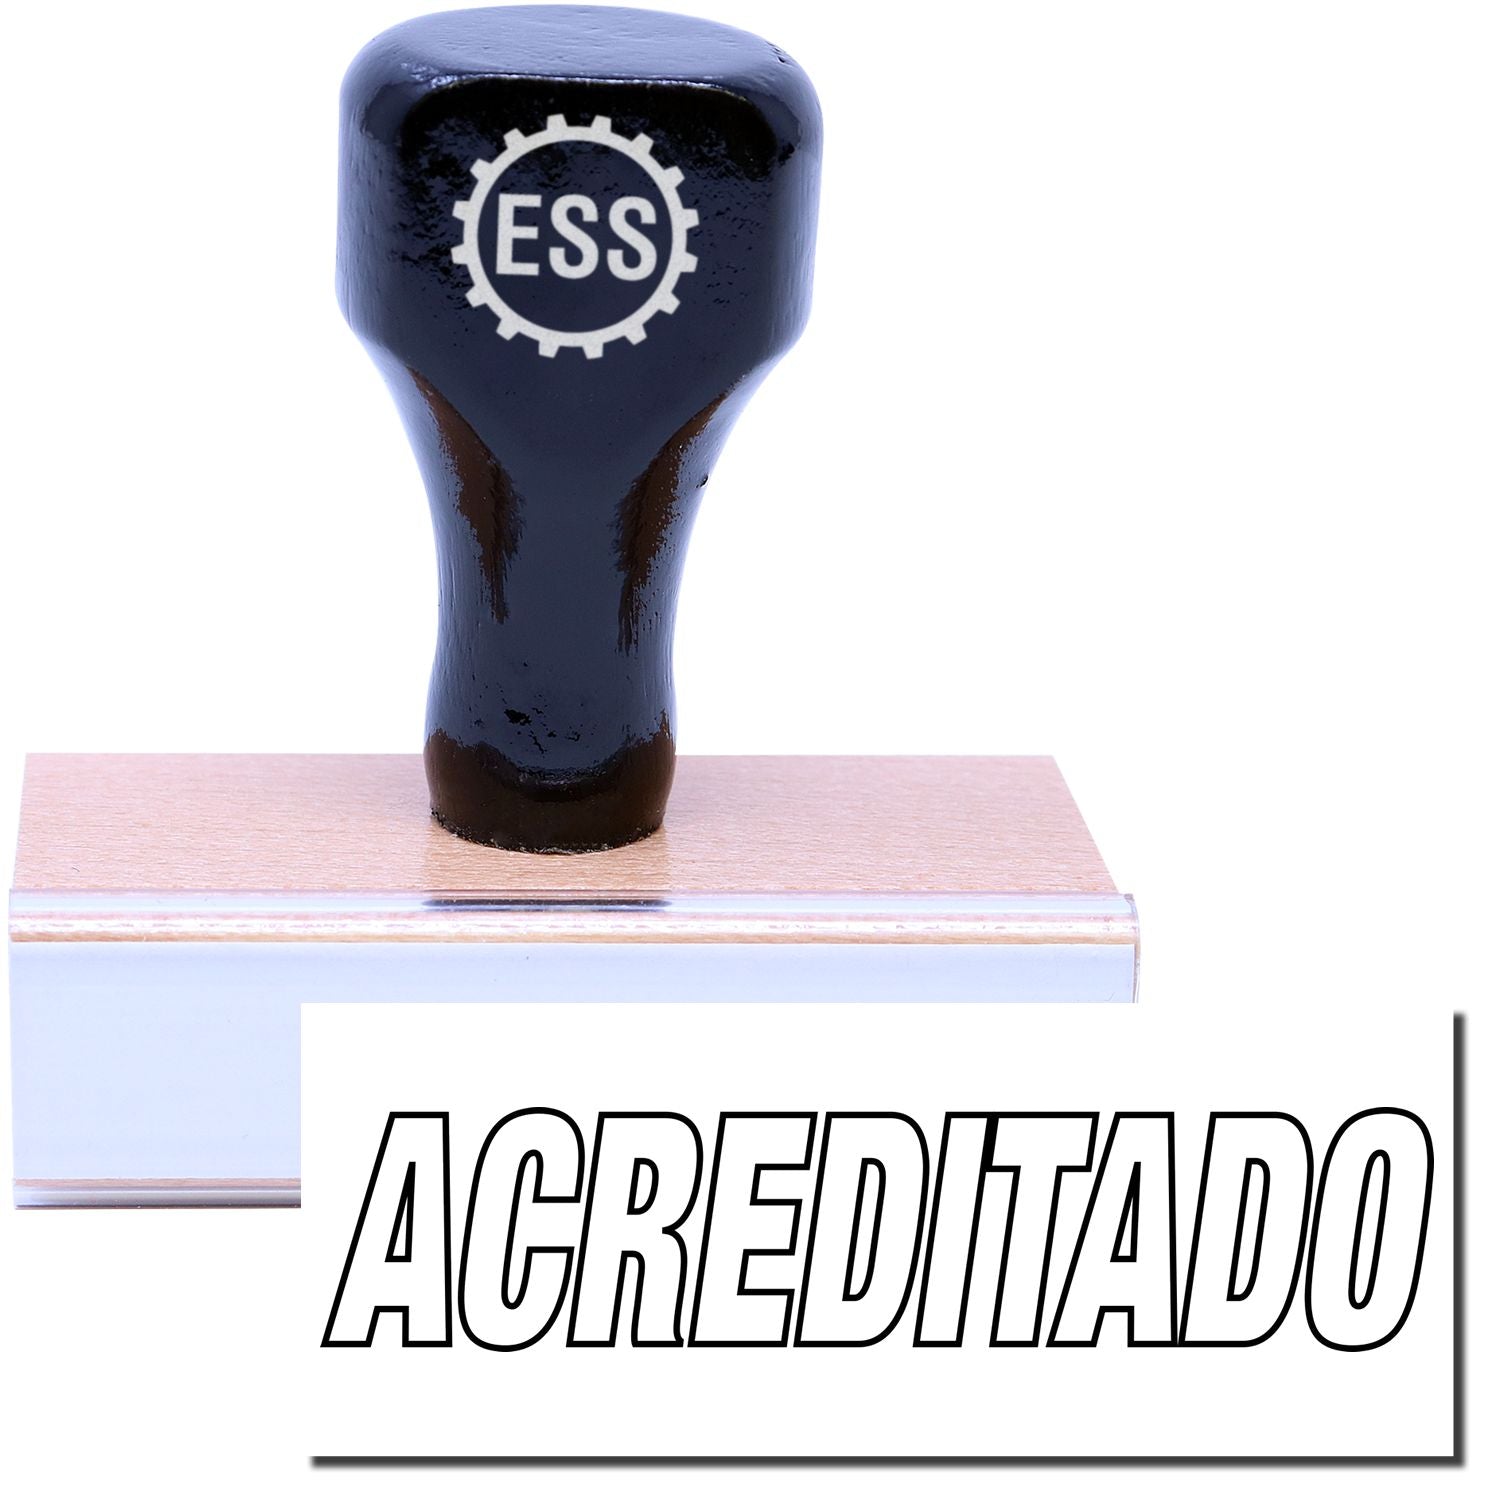 A stock office rubber stamp with a stamped image showing how the text "ACREDITADO" in an outline font is displayed after stamping.